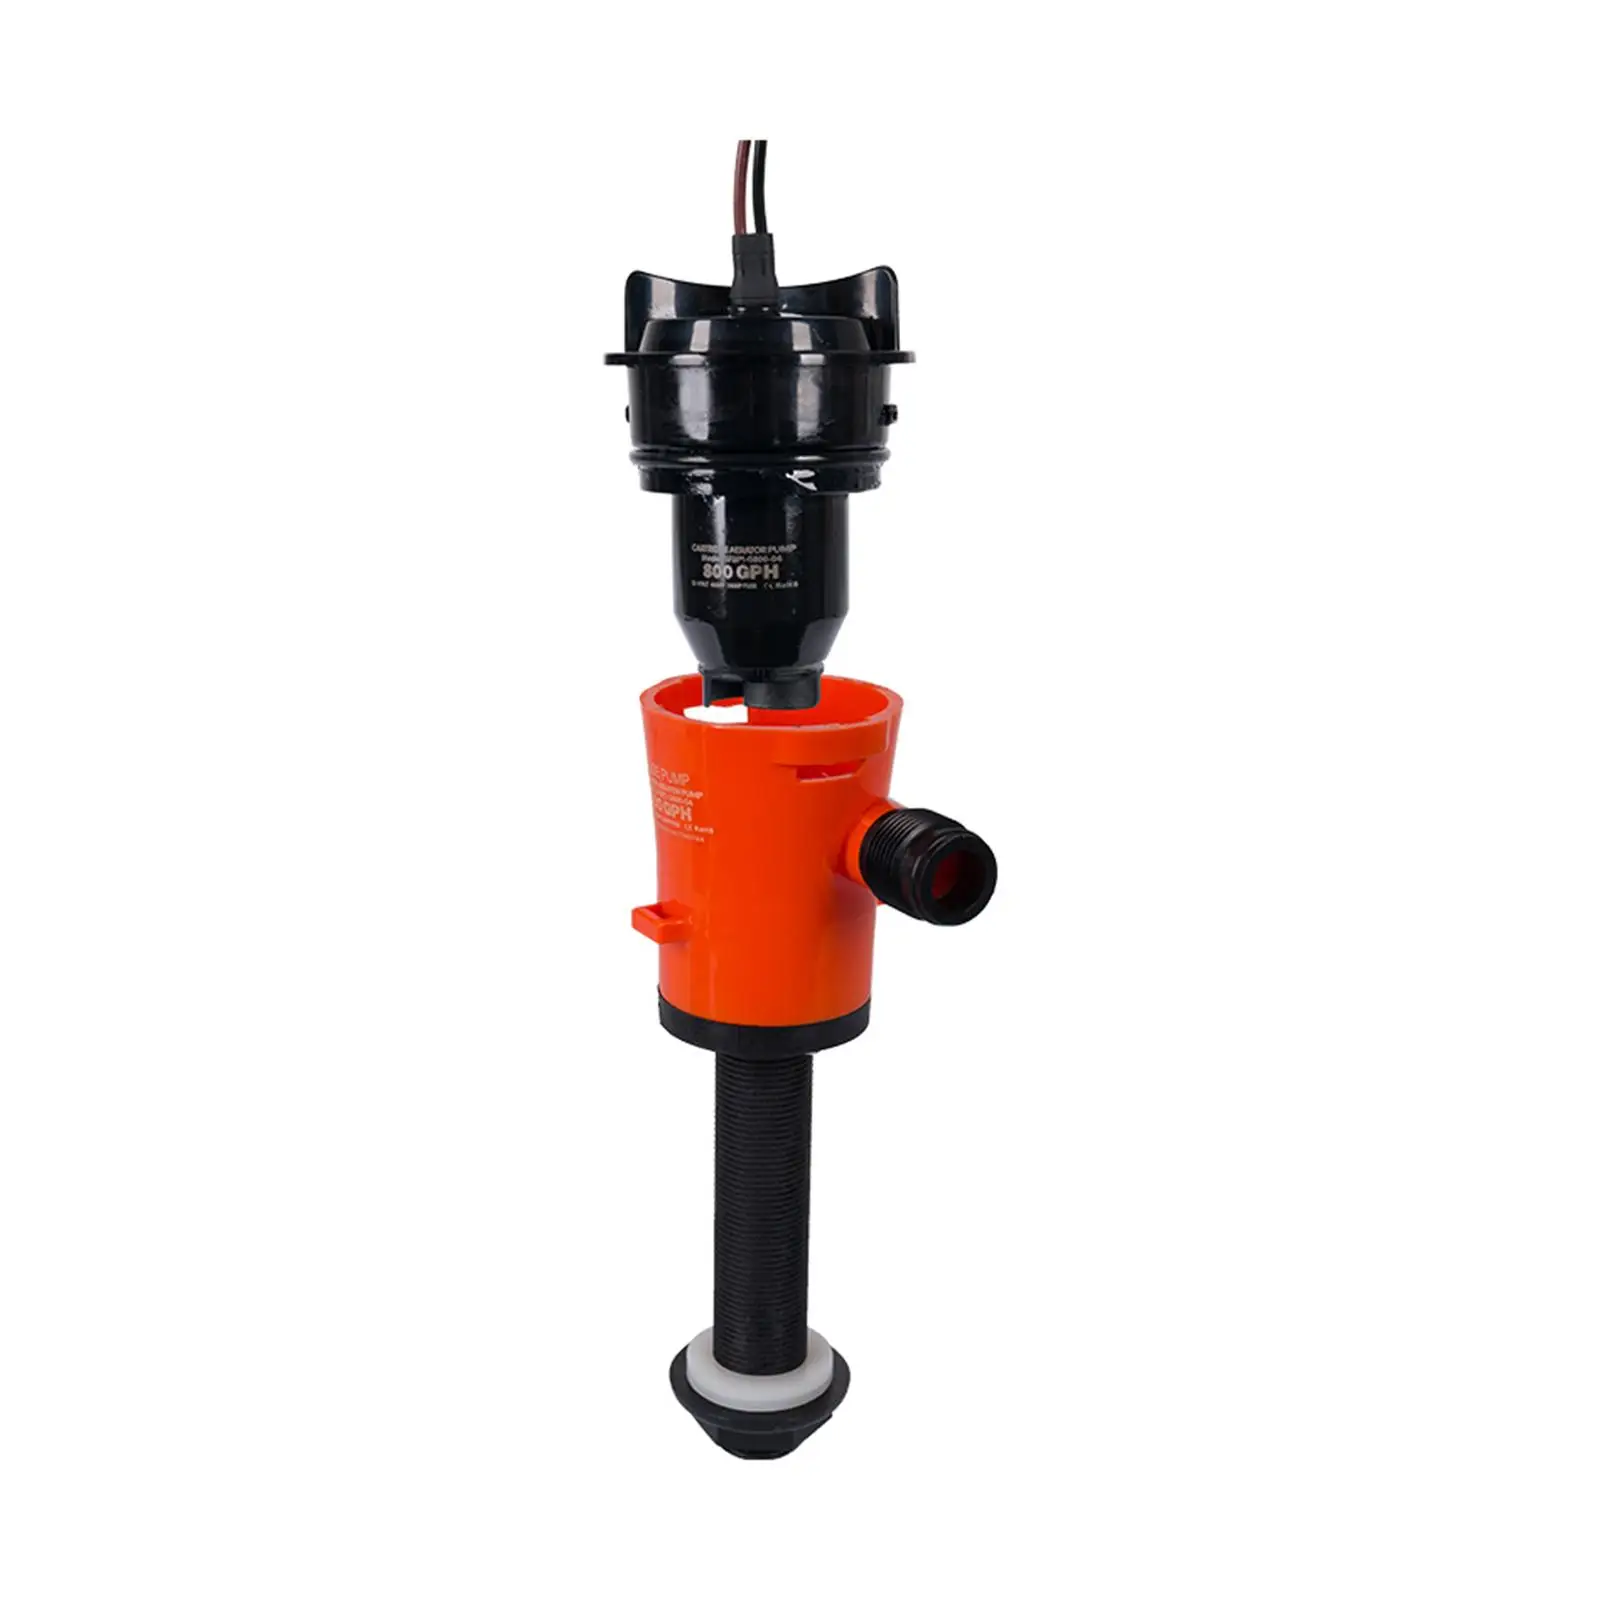 Aerator Livewell Pump Removable Durable Easy to Install Boat Tools Spare Parts Replaces Submersible Accessories Boat Bilge Pump